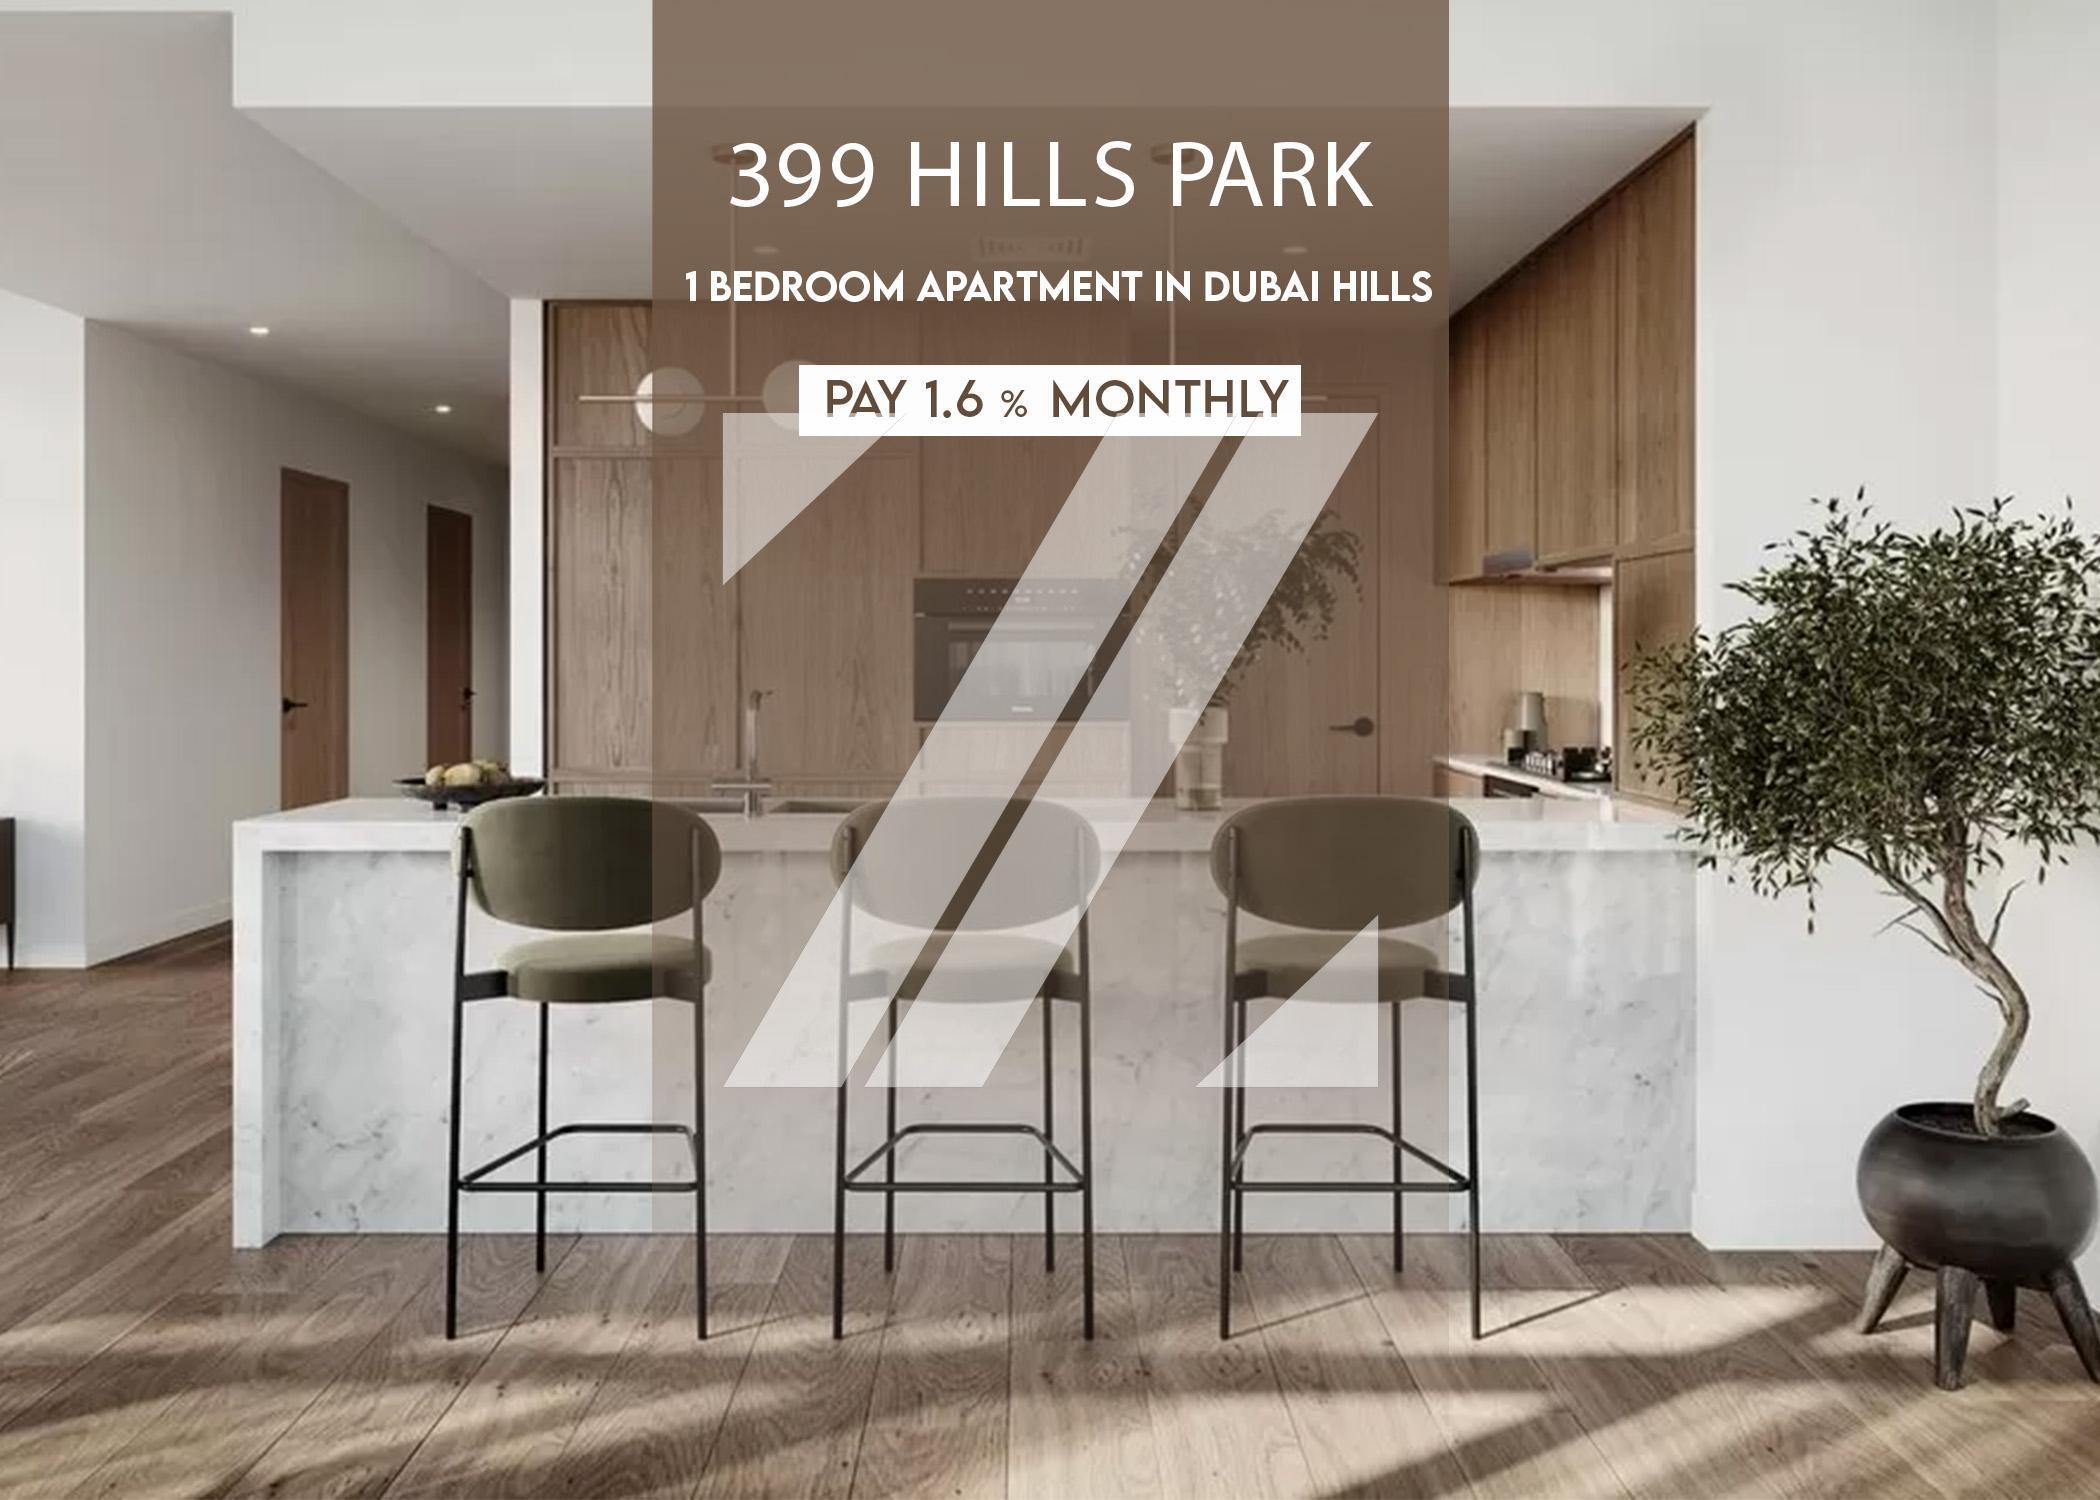 PAY AS LOW AS 1.6% MONTHLY l 10%DP | DUBAI HILLS